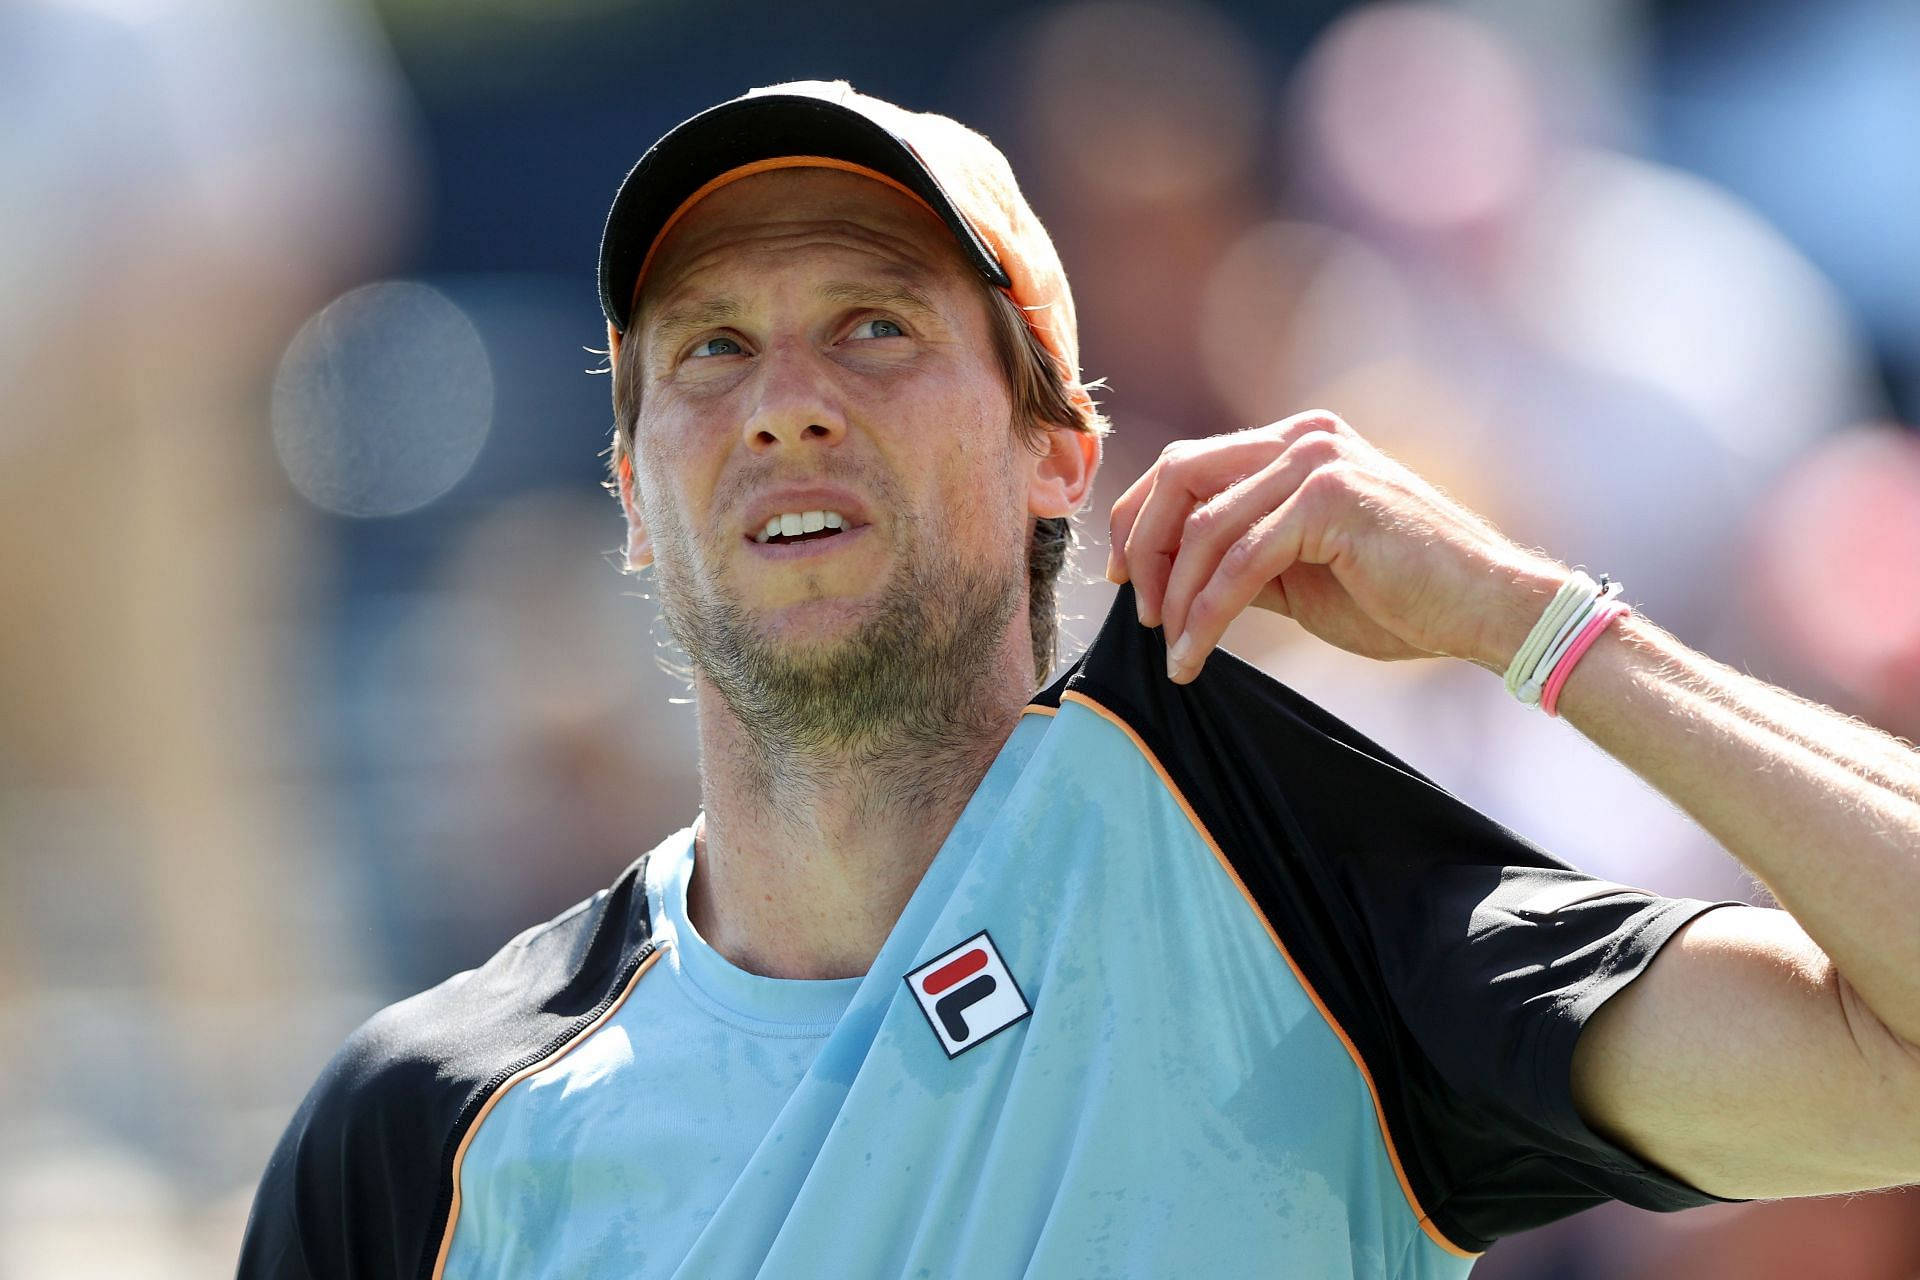 Caption: Champion Tennis Player Andreas Seppi, proudly holding his shirt Wallpaper